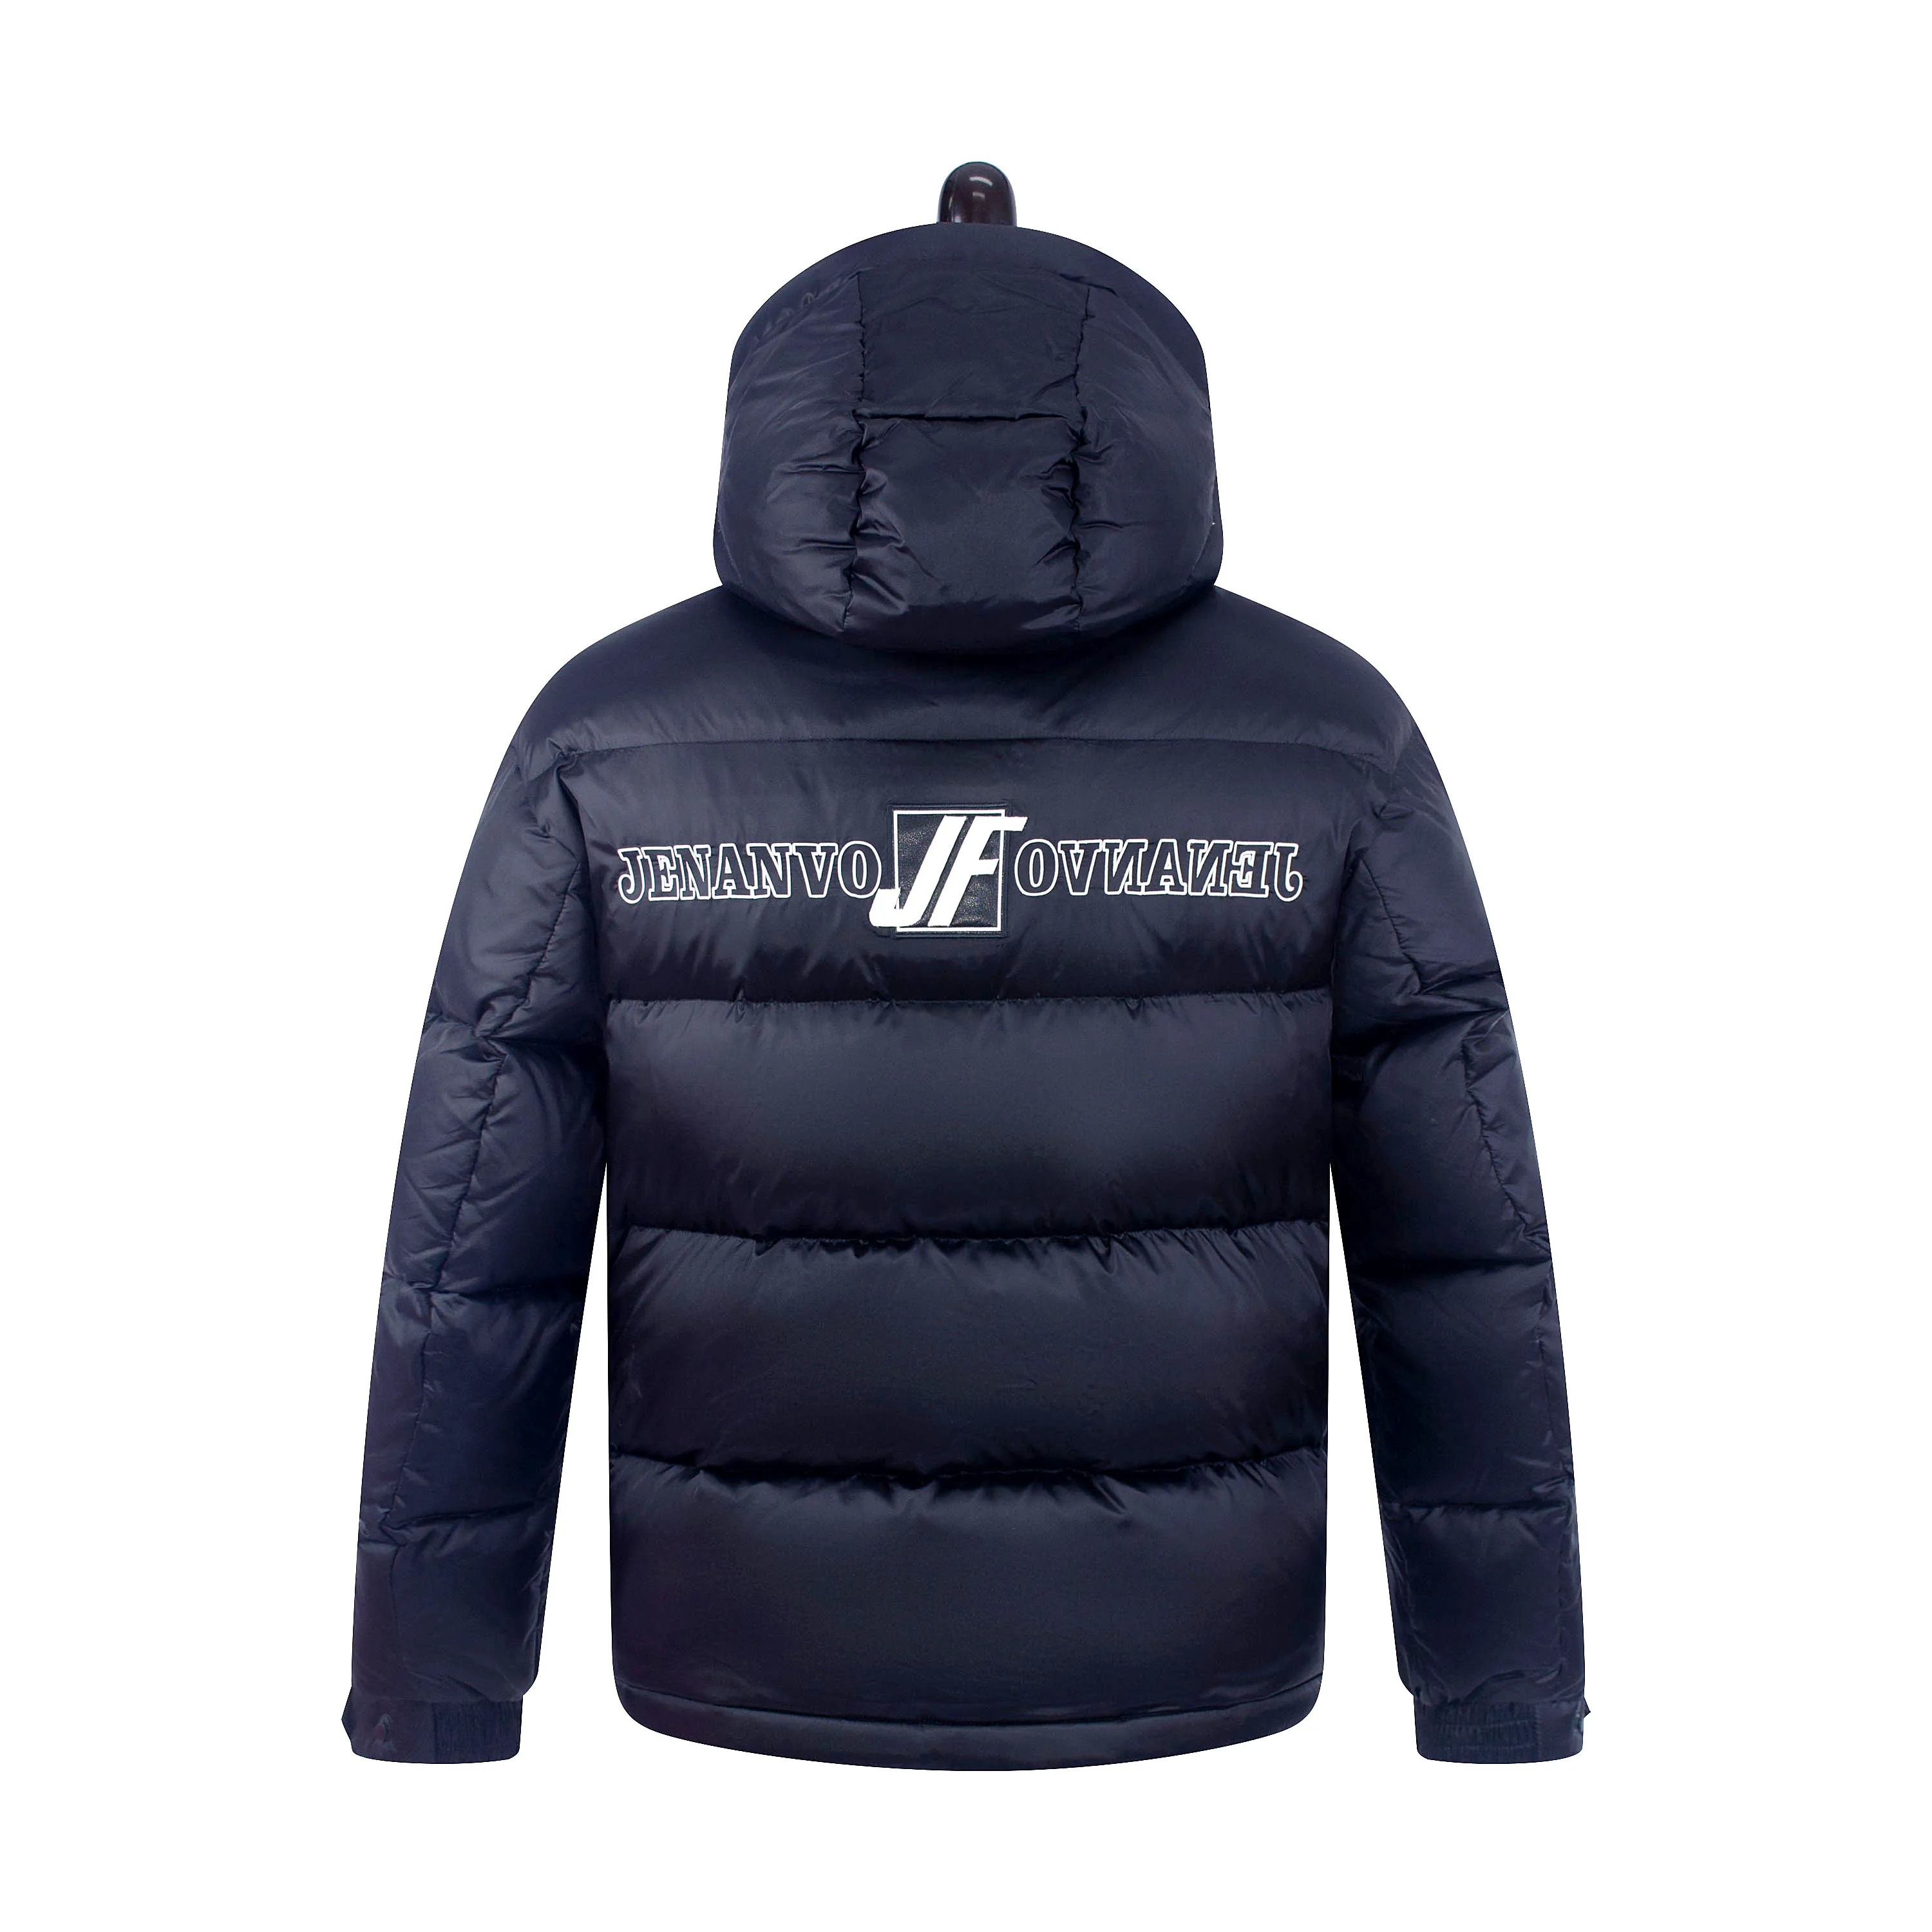 Designer Best Quality Stand Collar Hooded Windproof Zipper Woven Men's Embroidered Down Jacket For Winter